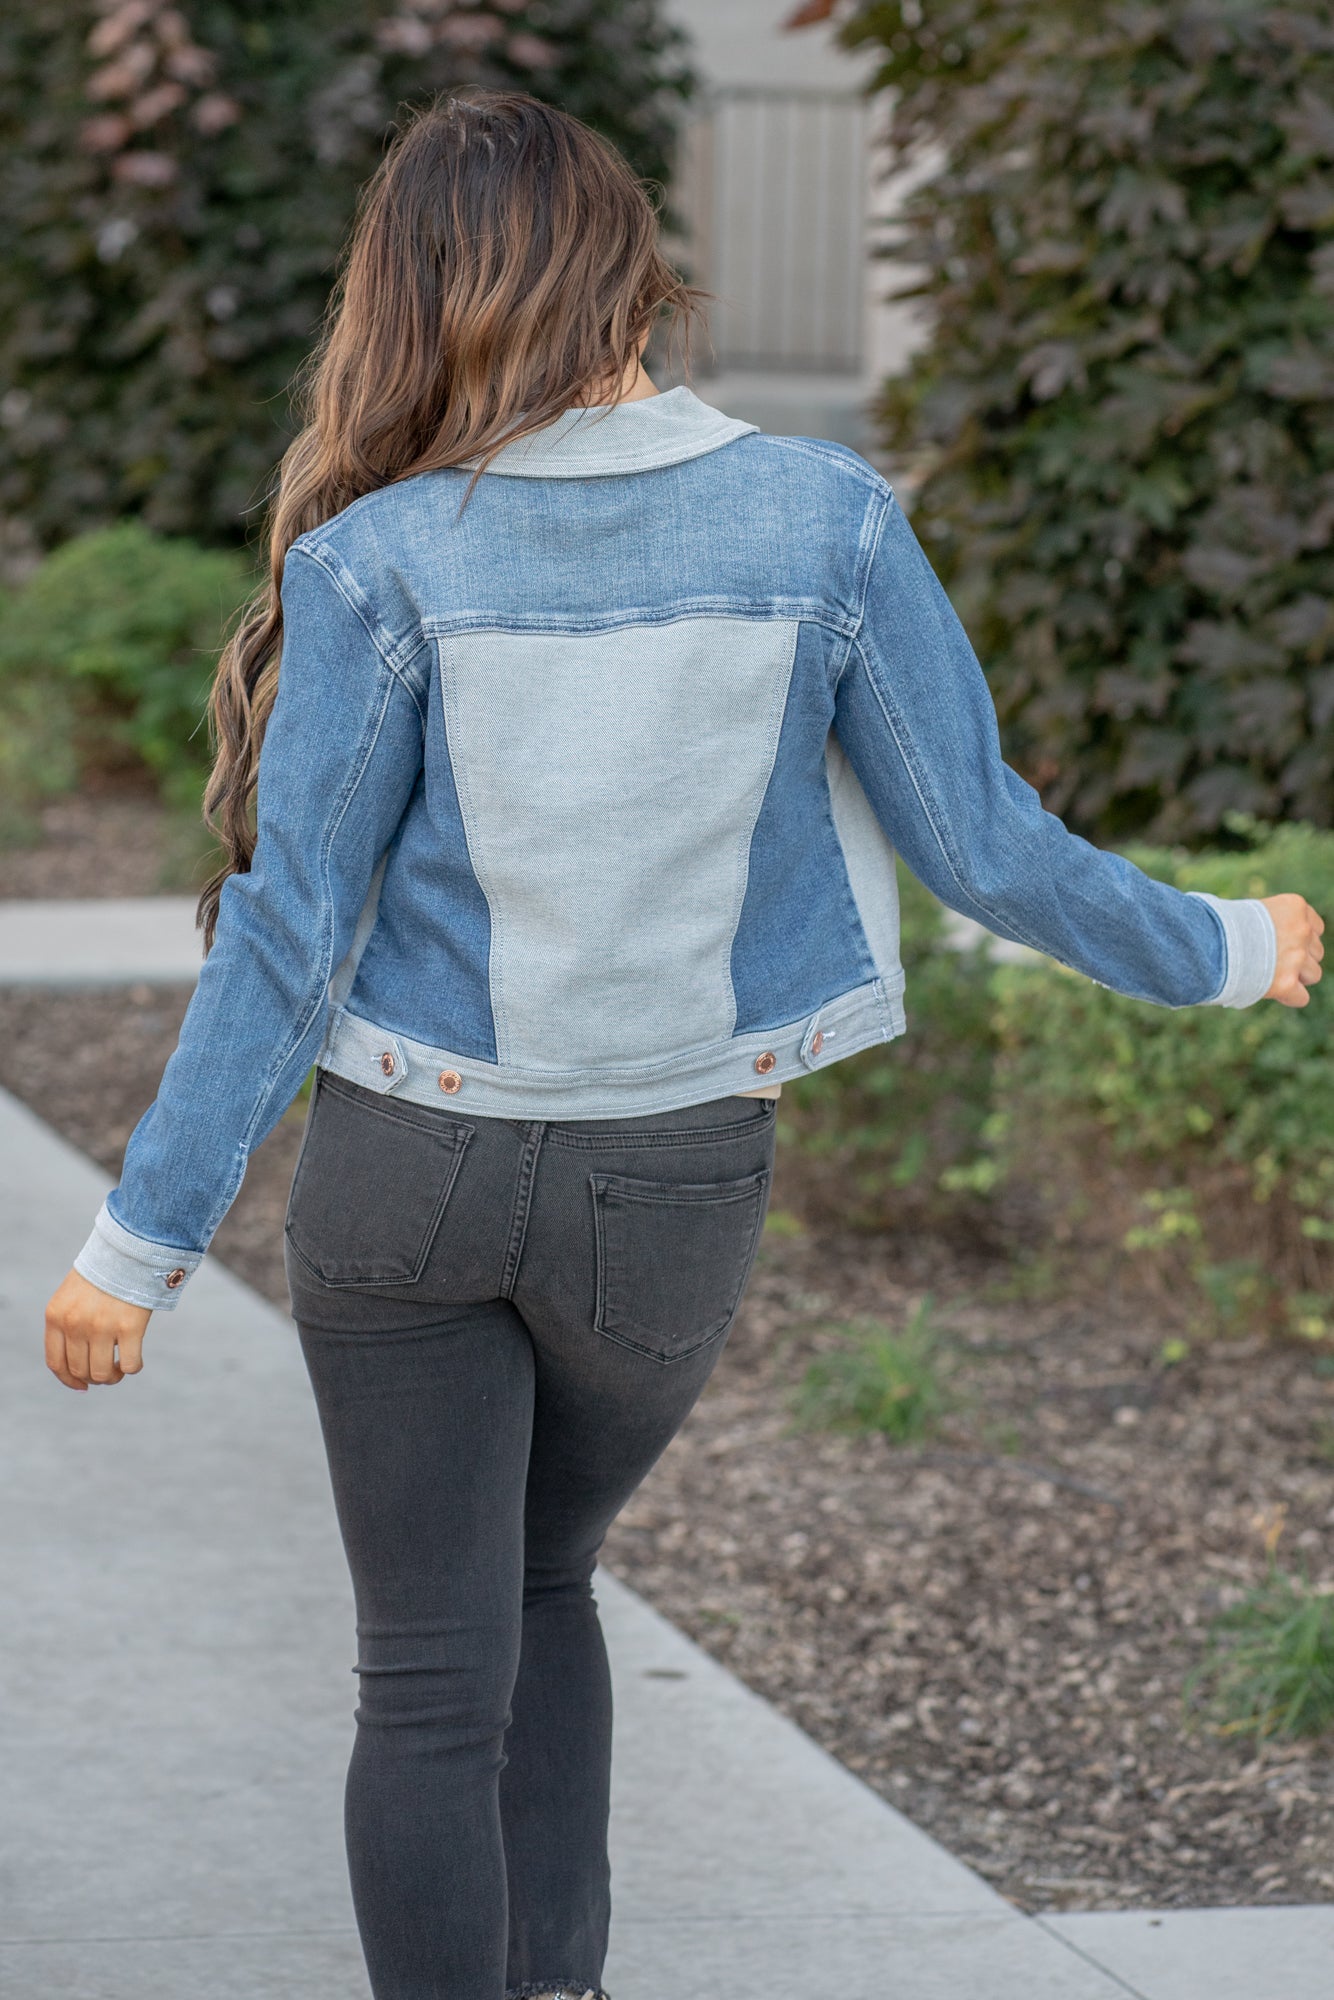 3 Outfit Combinations On How to Style Denim Jacket For Spring And Summer -  Dreaming Loud